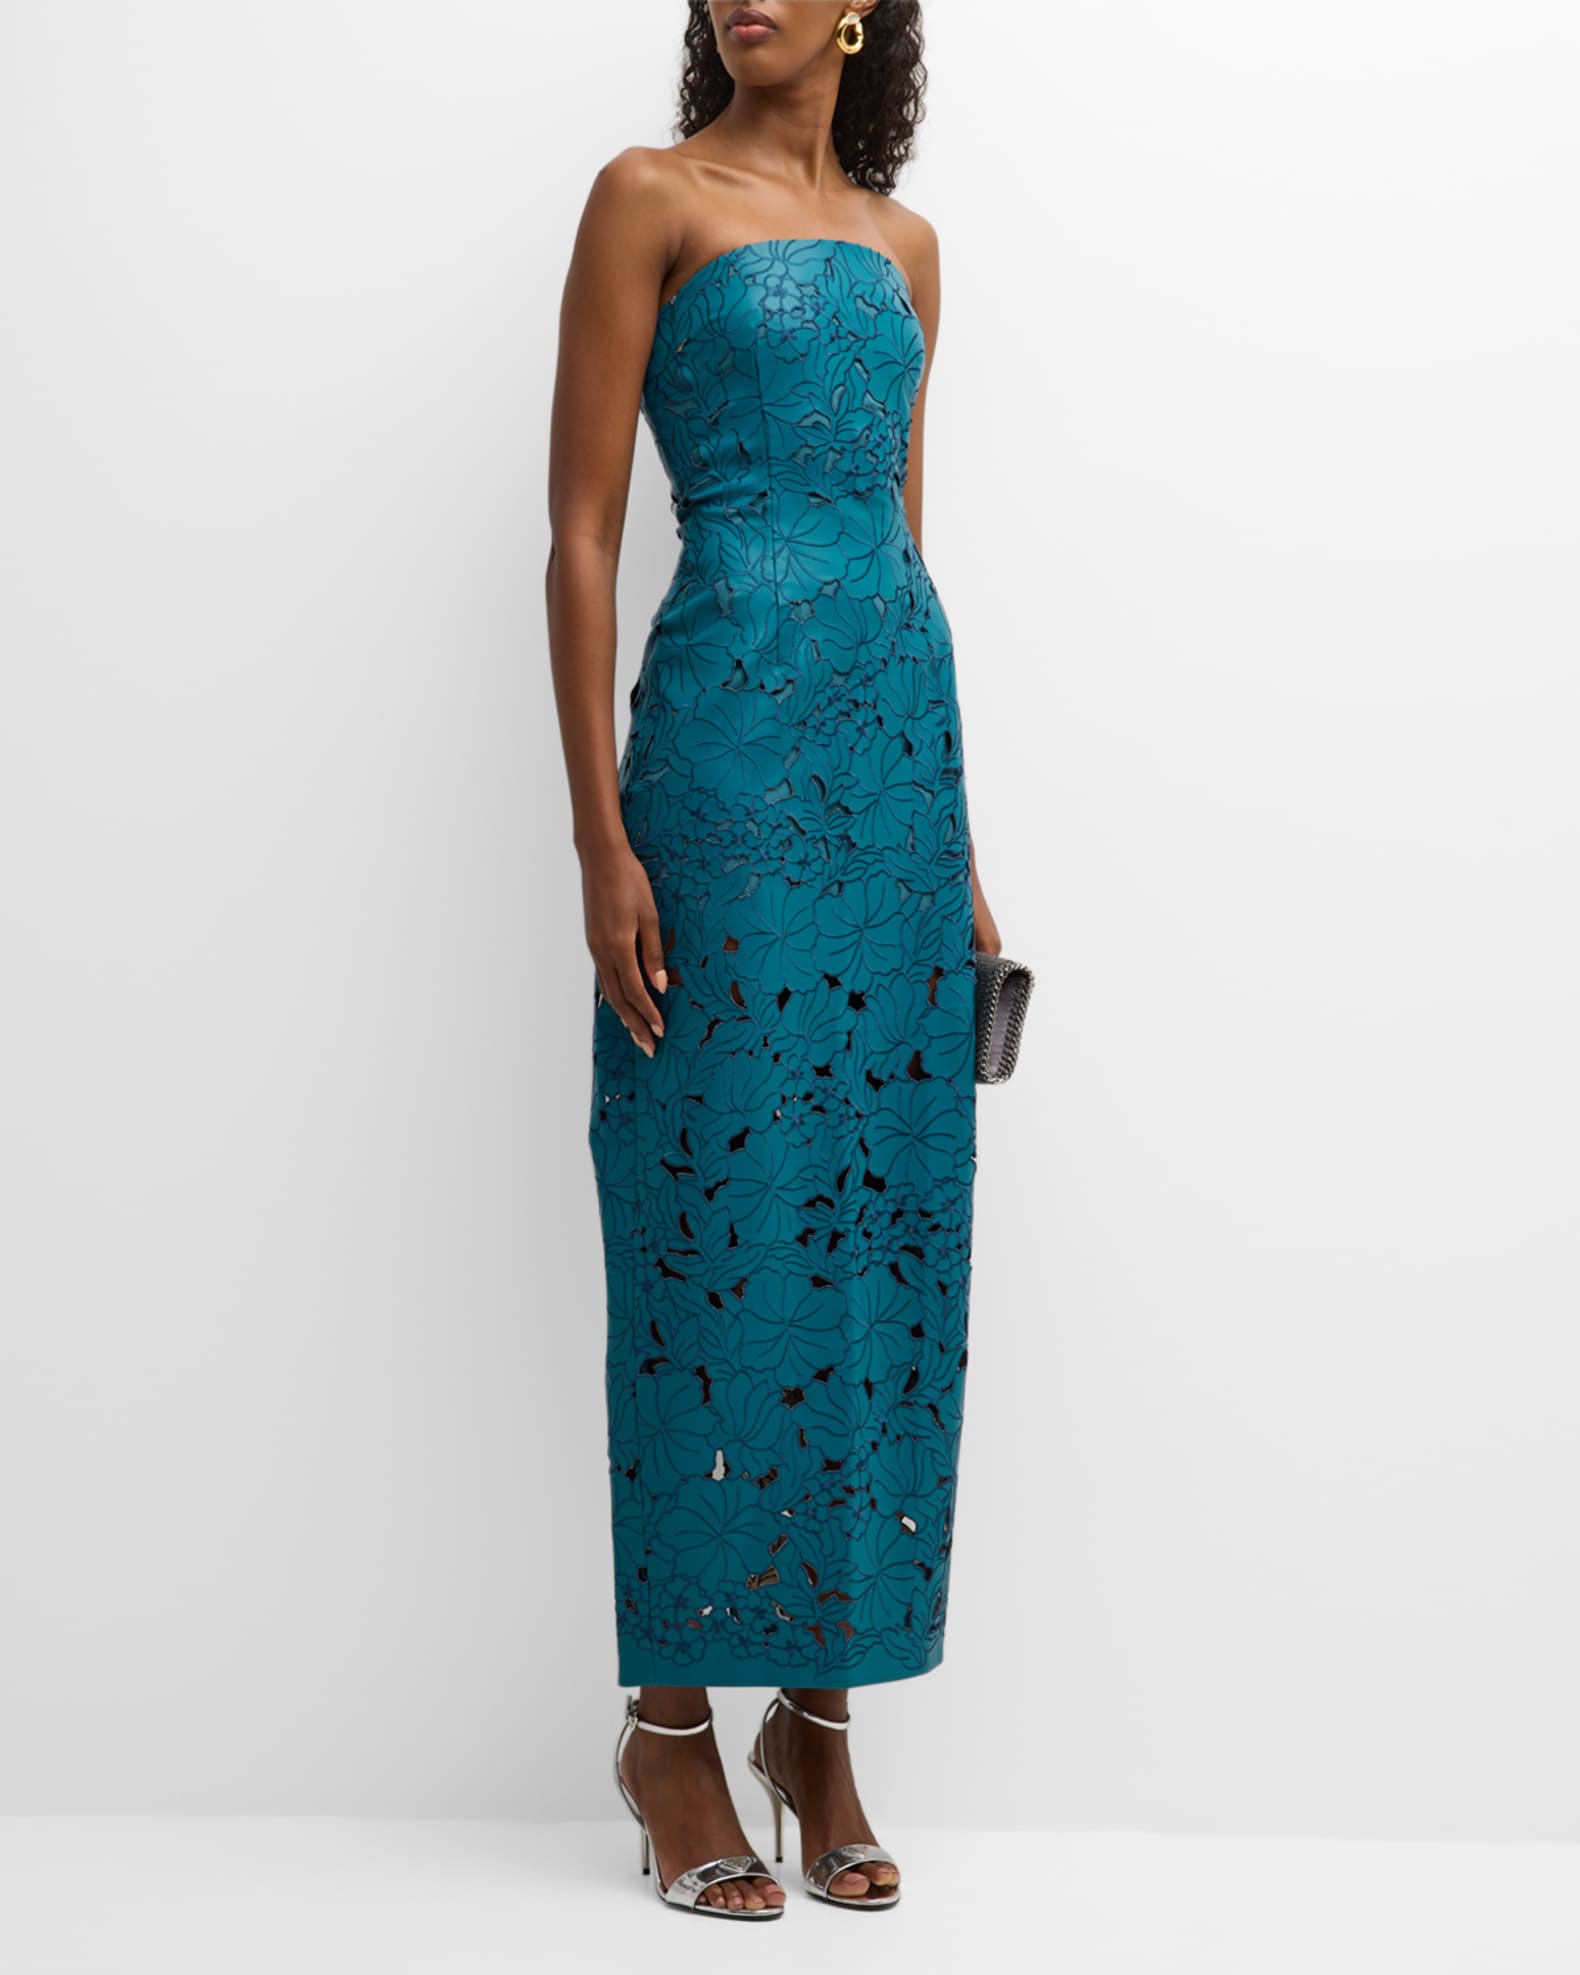 Cult Gaia Raylene Strapless Cutout Embroidered Gown | Neiman Marcus